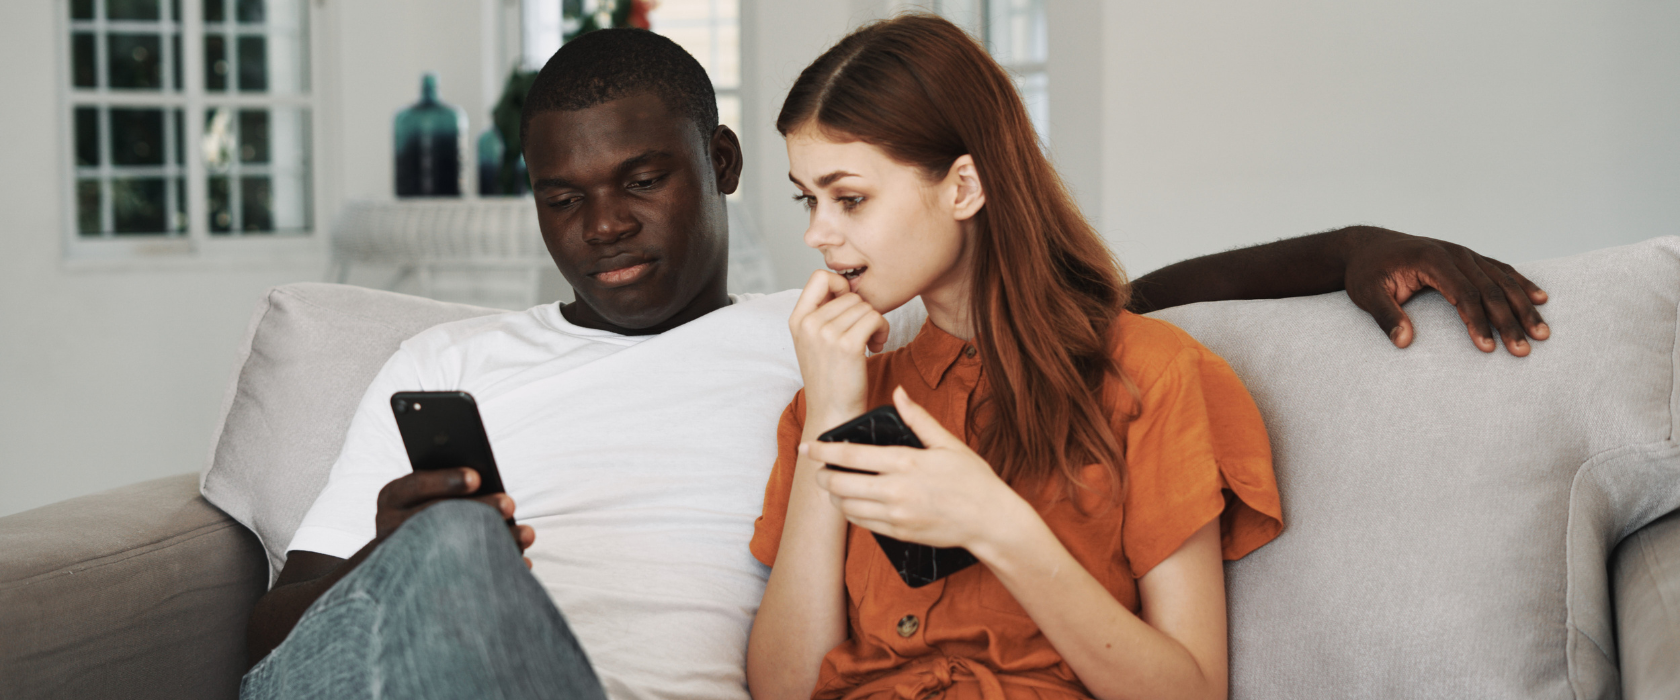 A man holds his phone while his girlfriend looks at it with intrigue.